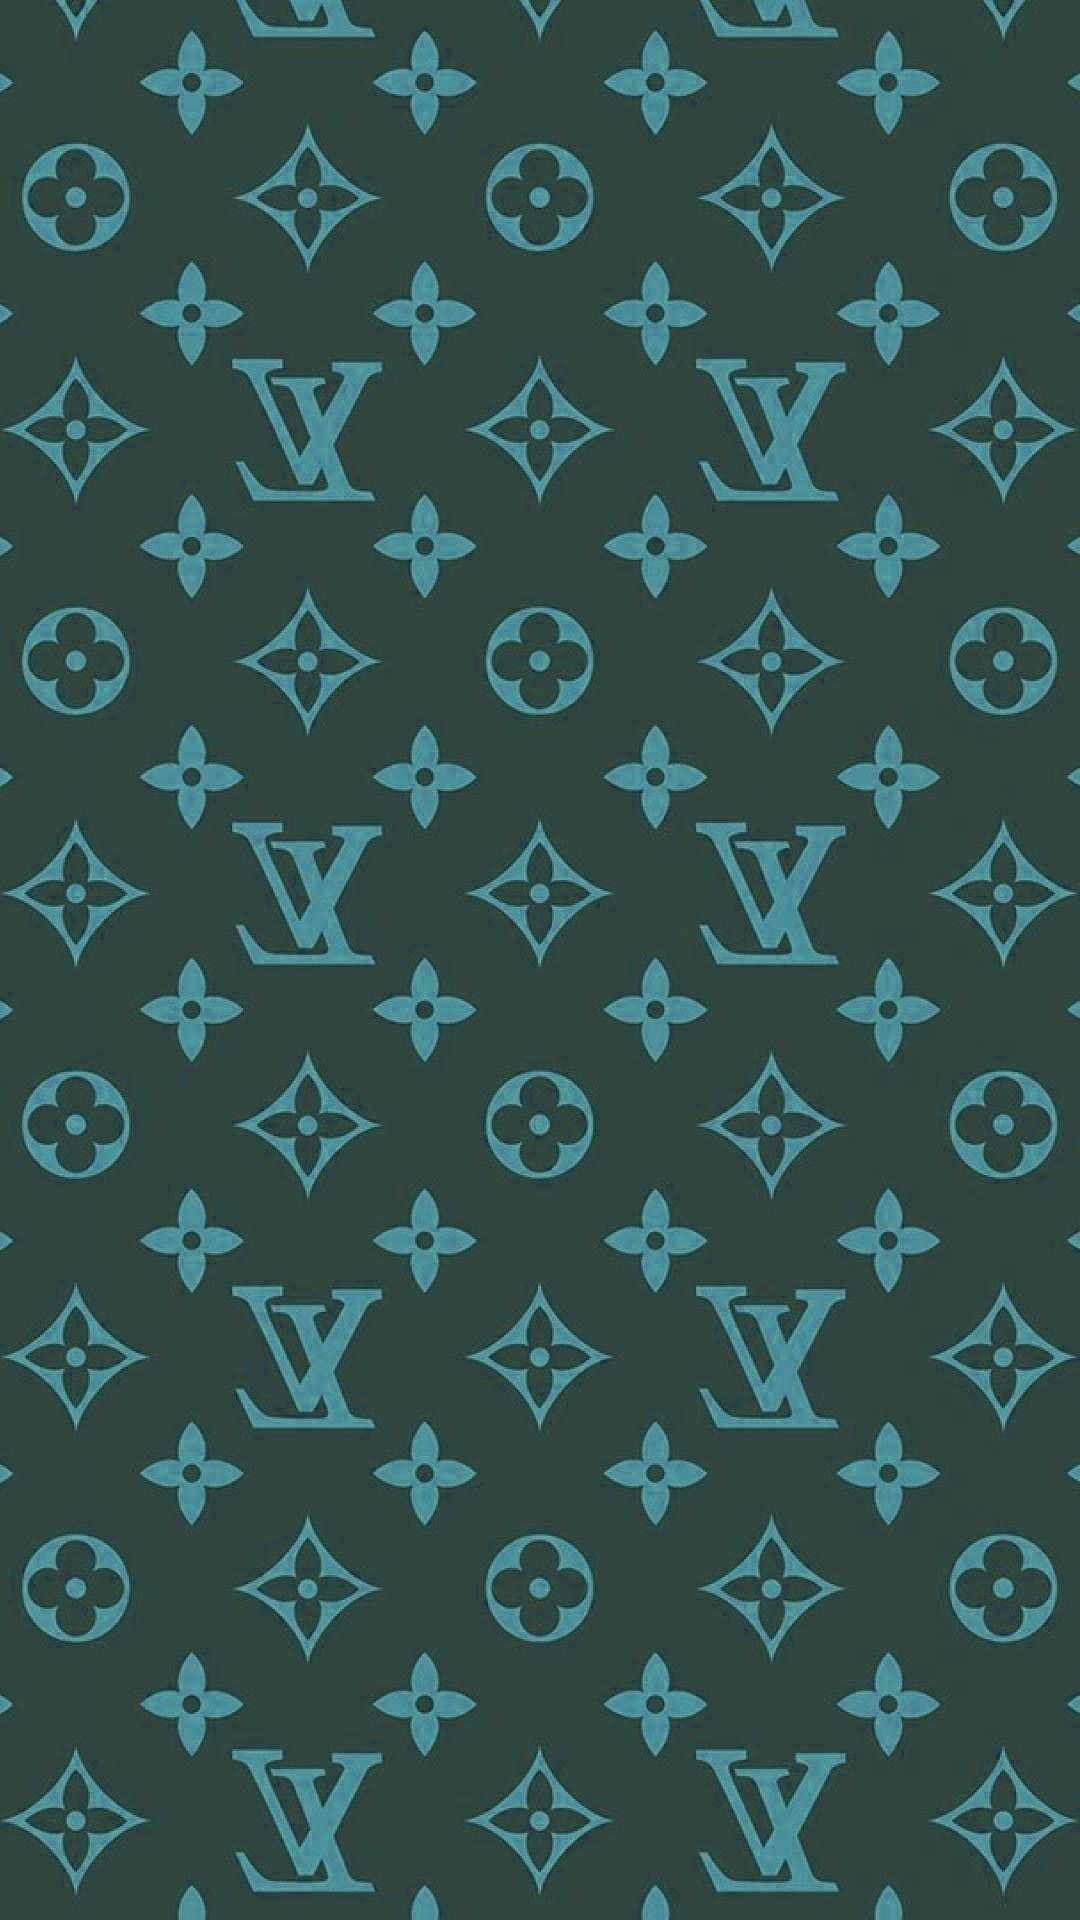 Louis Vuitton: LV, Took the first place in the BrandZ's top 10 most valuable luxury brands in 2019. 1080x1920 Full HD Background.